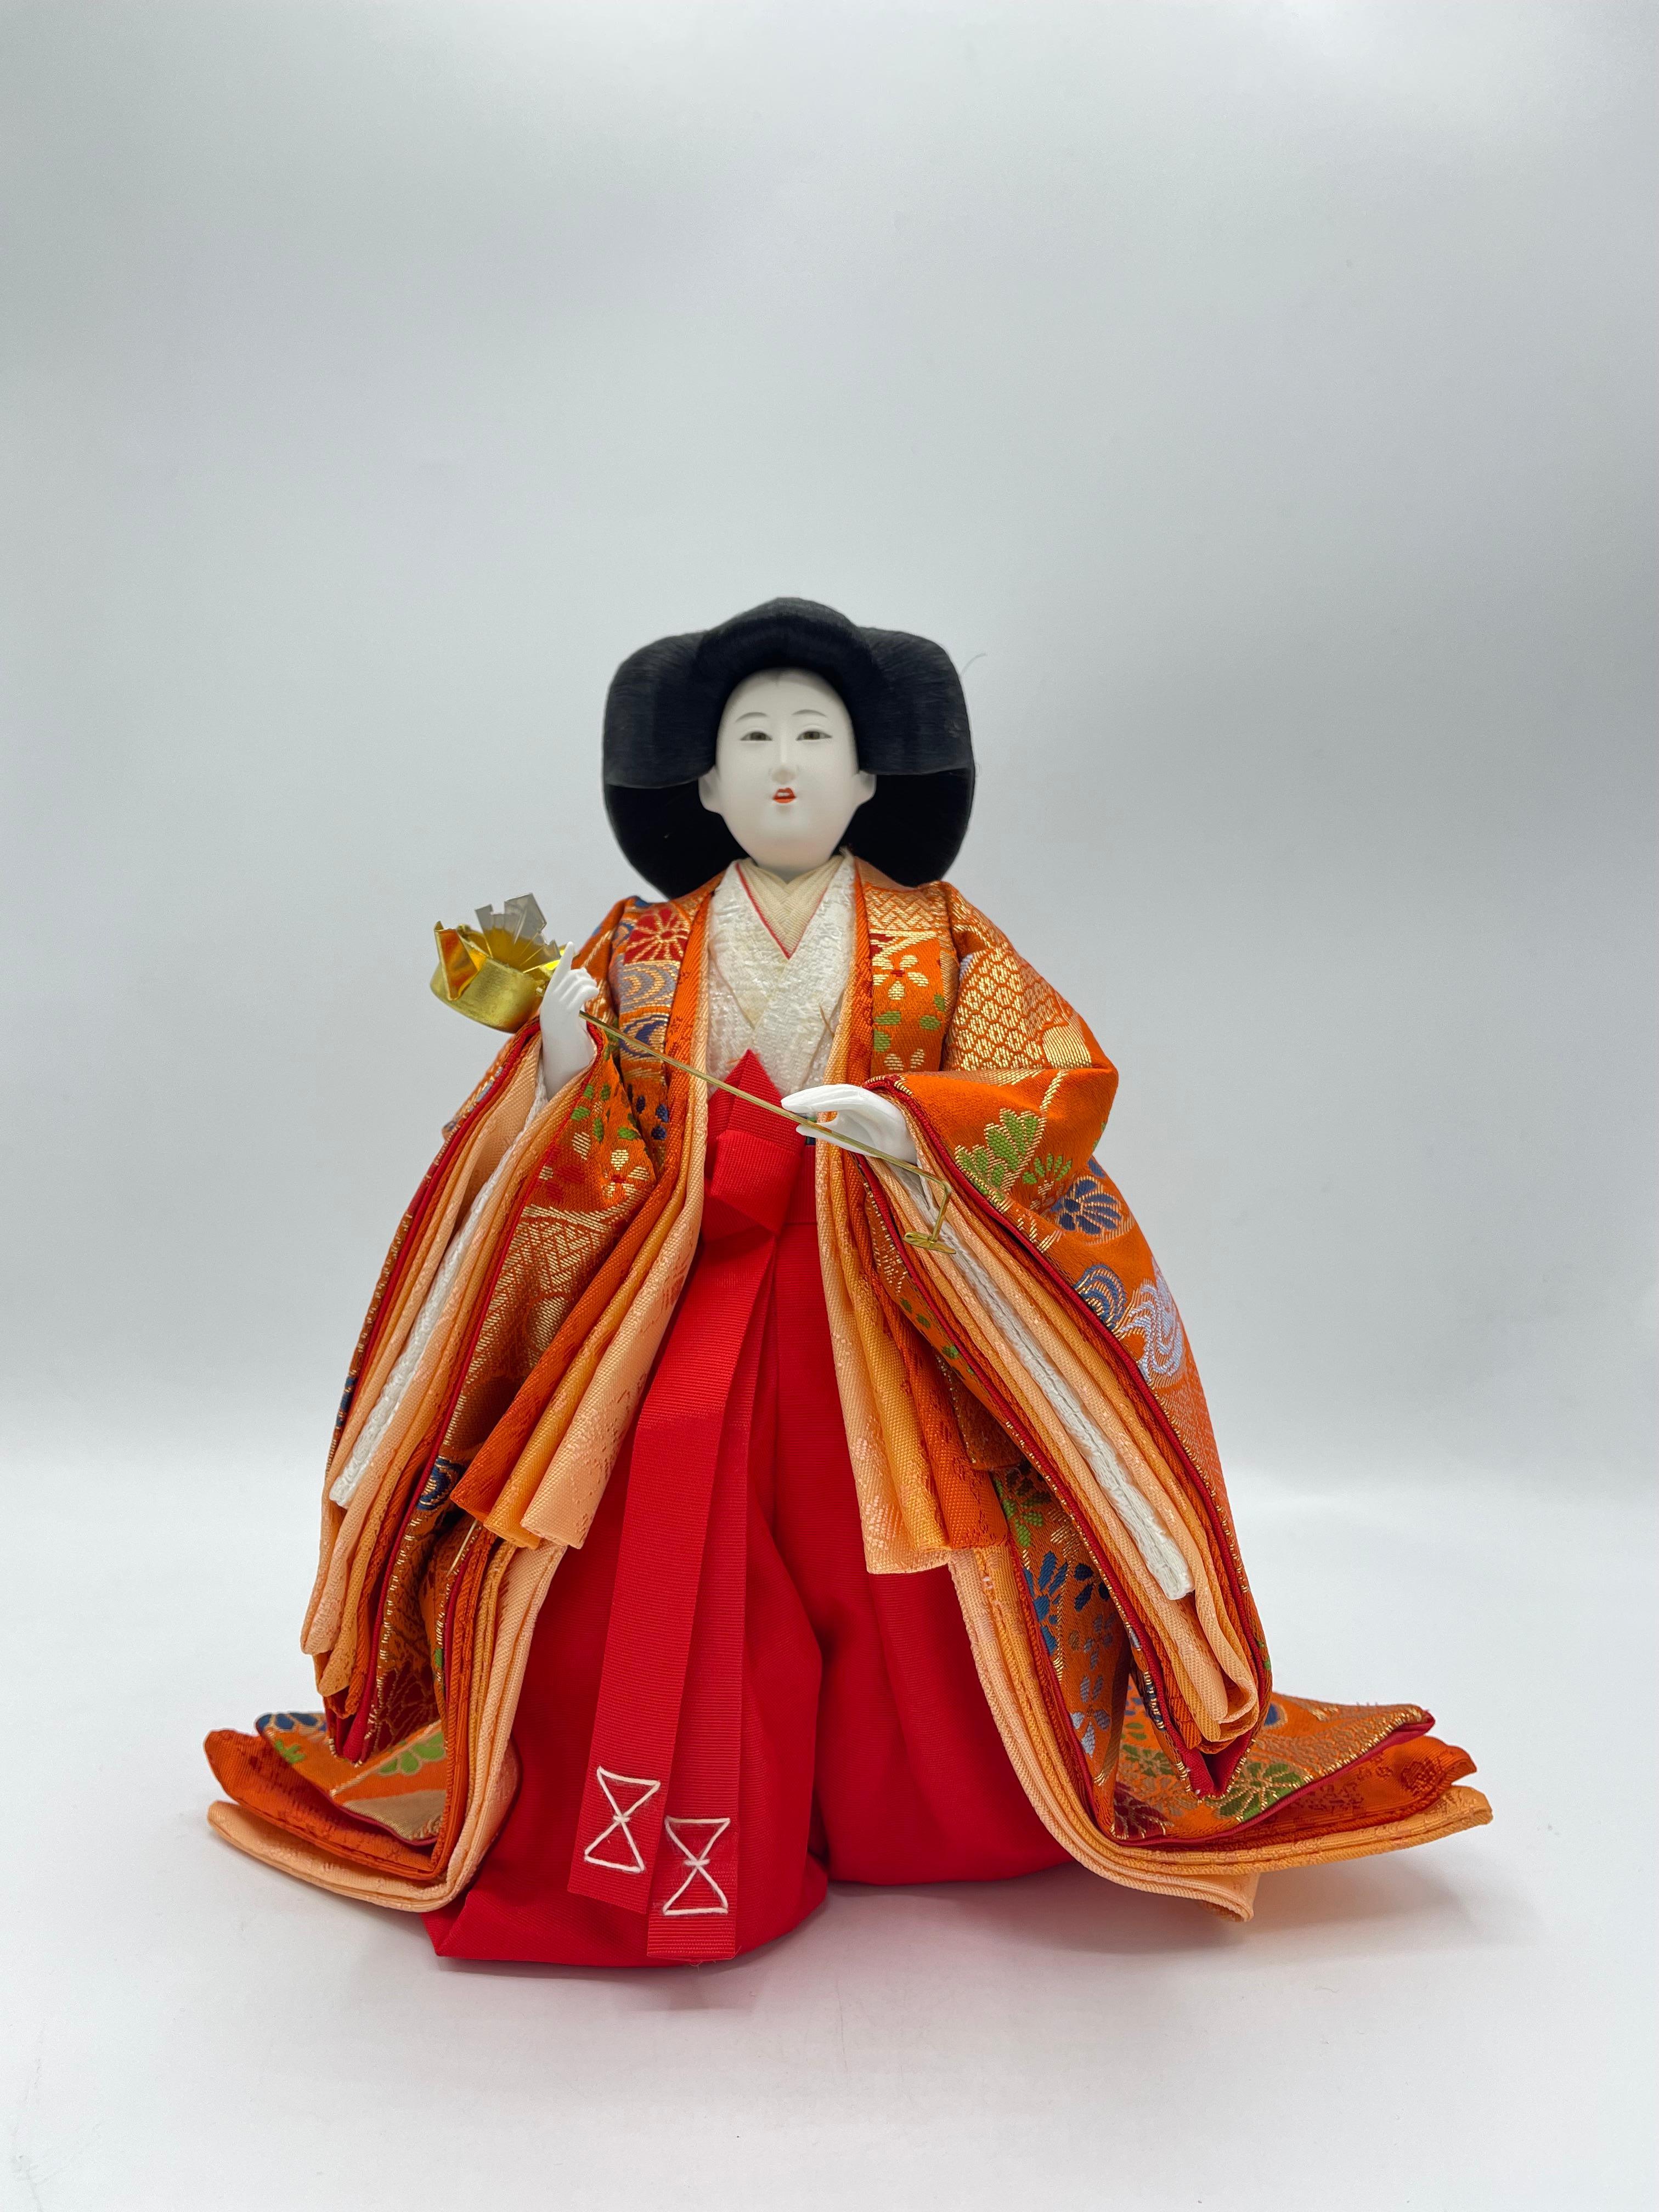 This is a doll which we use for Hinamatsuri day. This person is one of Sannin Kanjo.
This person has Nagae no choshi. This doll was made with plastic, cotton, silk and metal. This doll was made around 1980s in Showa era. 

*
Hinamatsuri